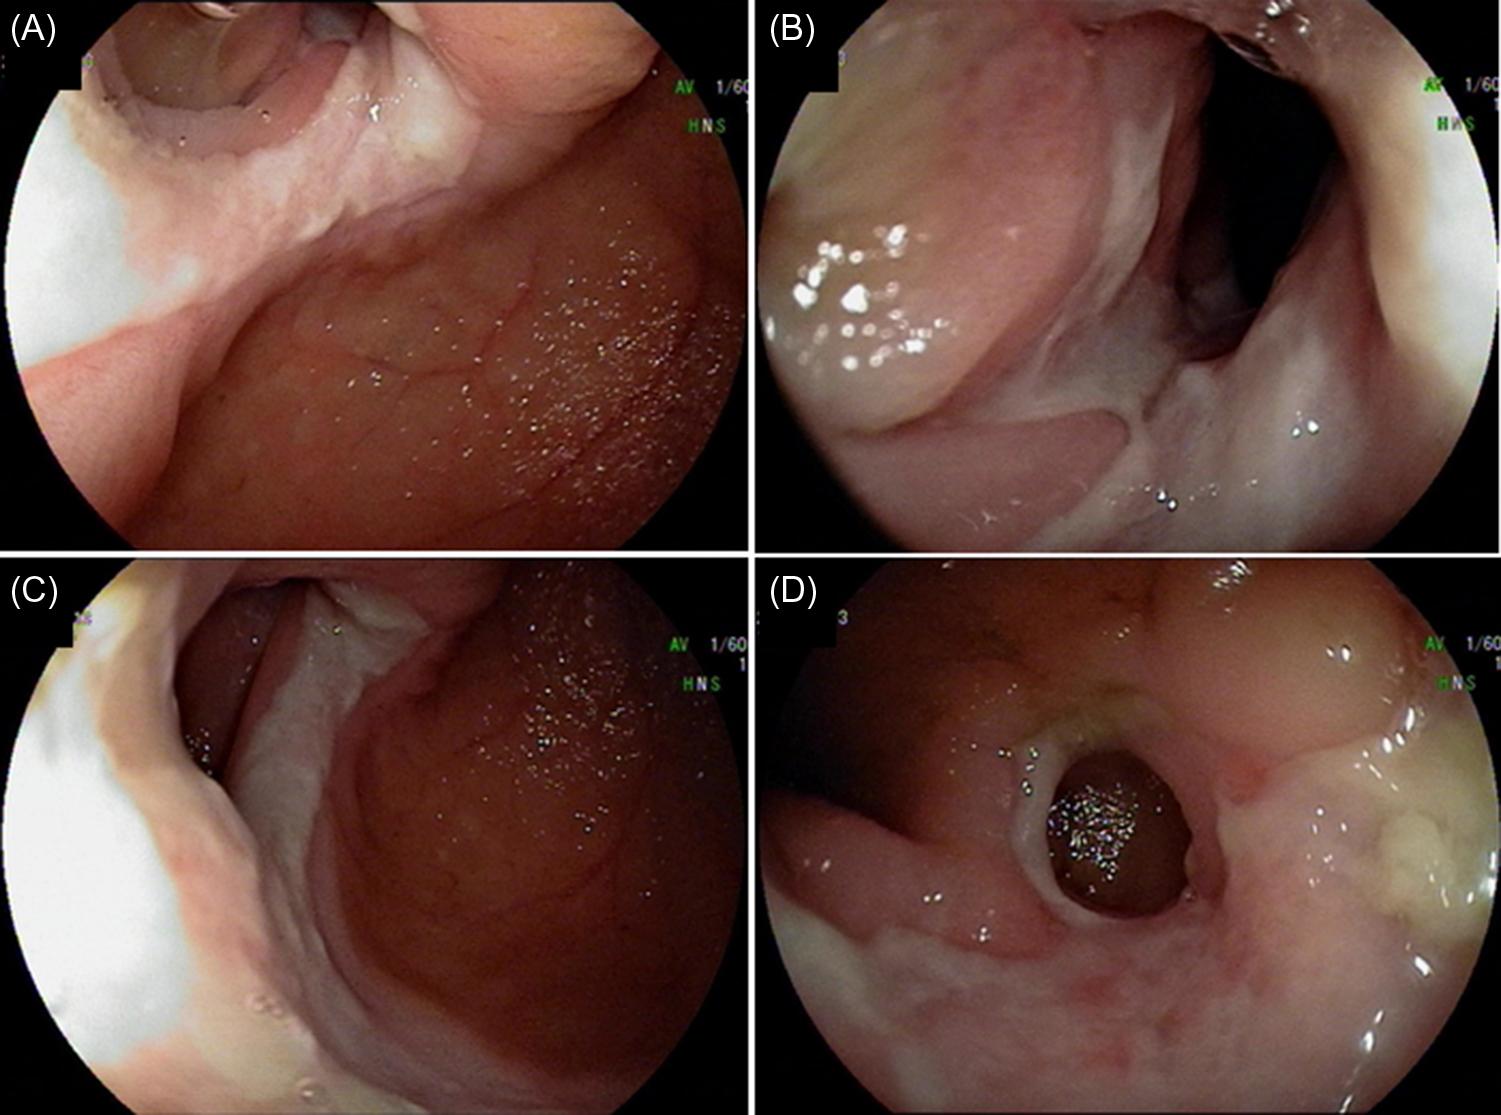 Figure 32.4, Cryptogenic multifocal ulcerous stenosing enteritis. (A–D) Discrete ulcerated strictures in the jejunum and ileum with normal mucosa of the small bowel segments in between.